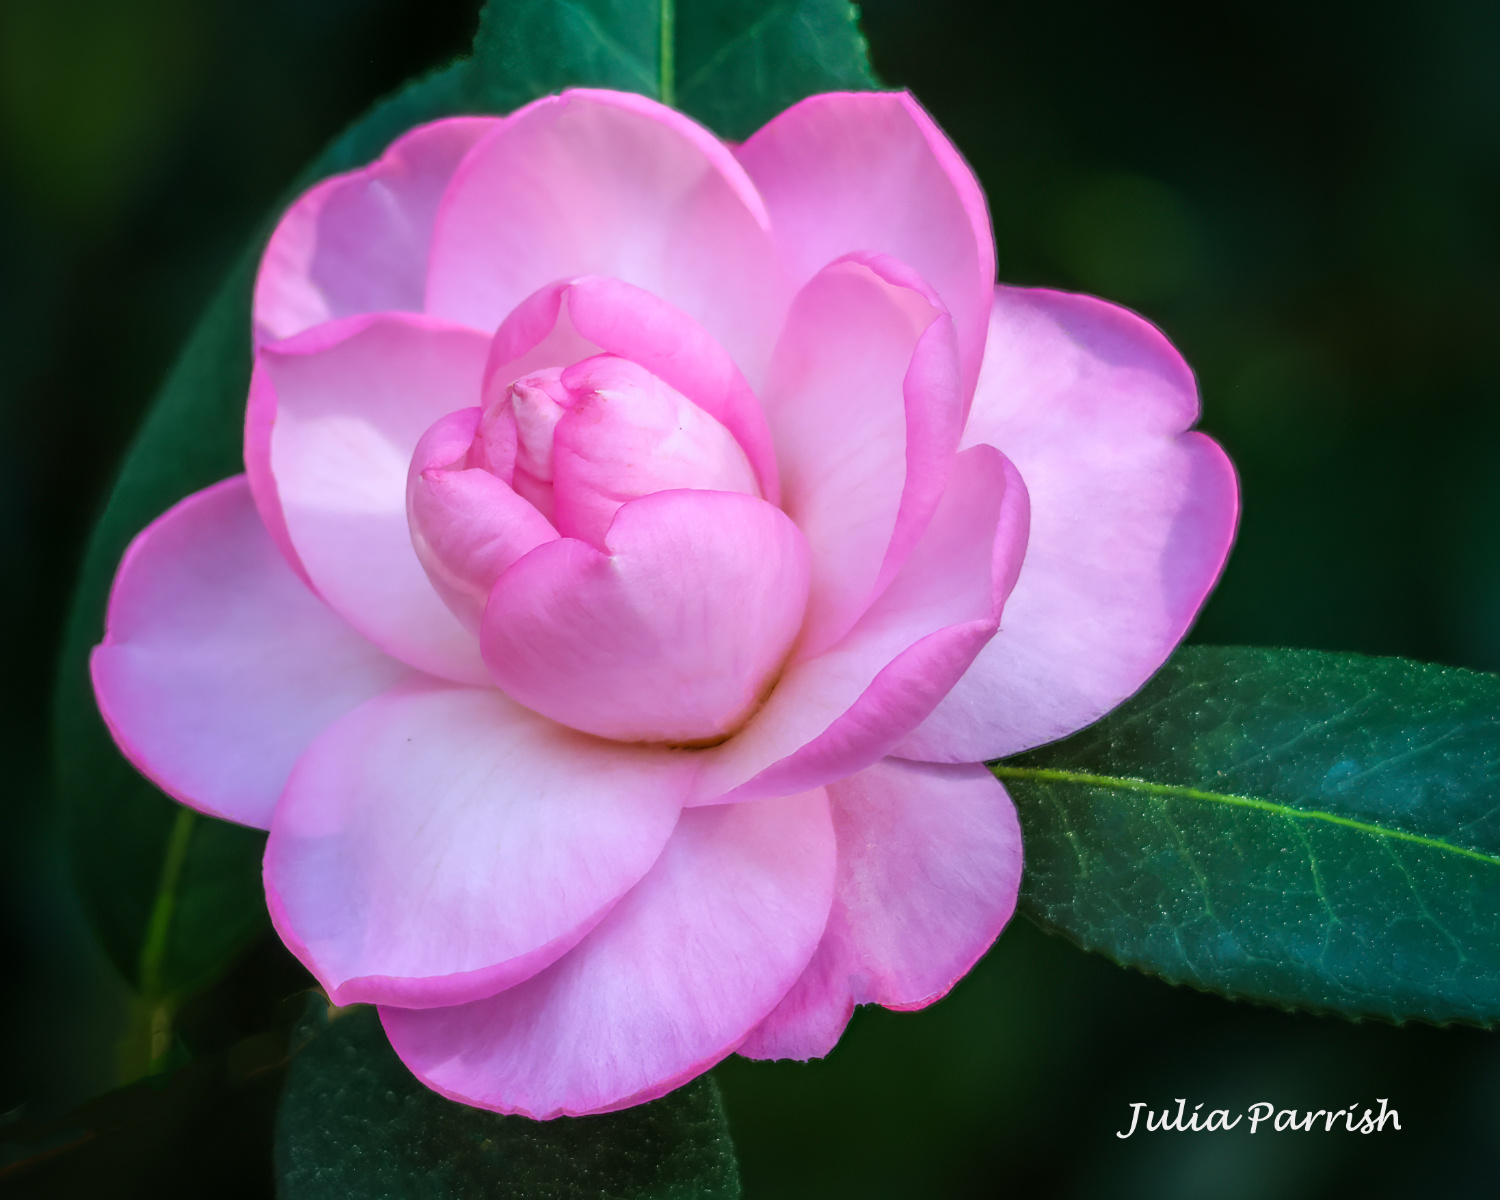 Camellia Bloom by Julia Parrish